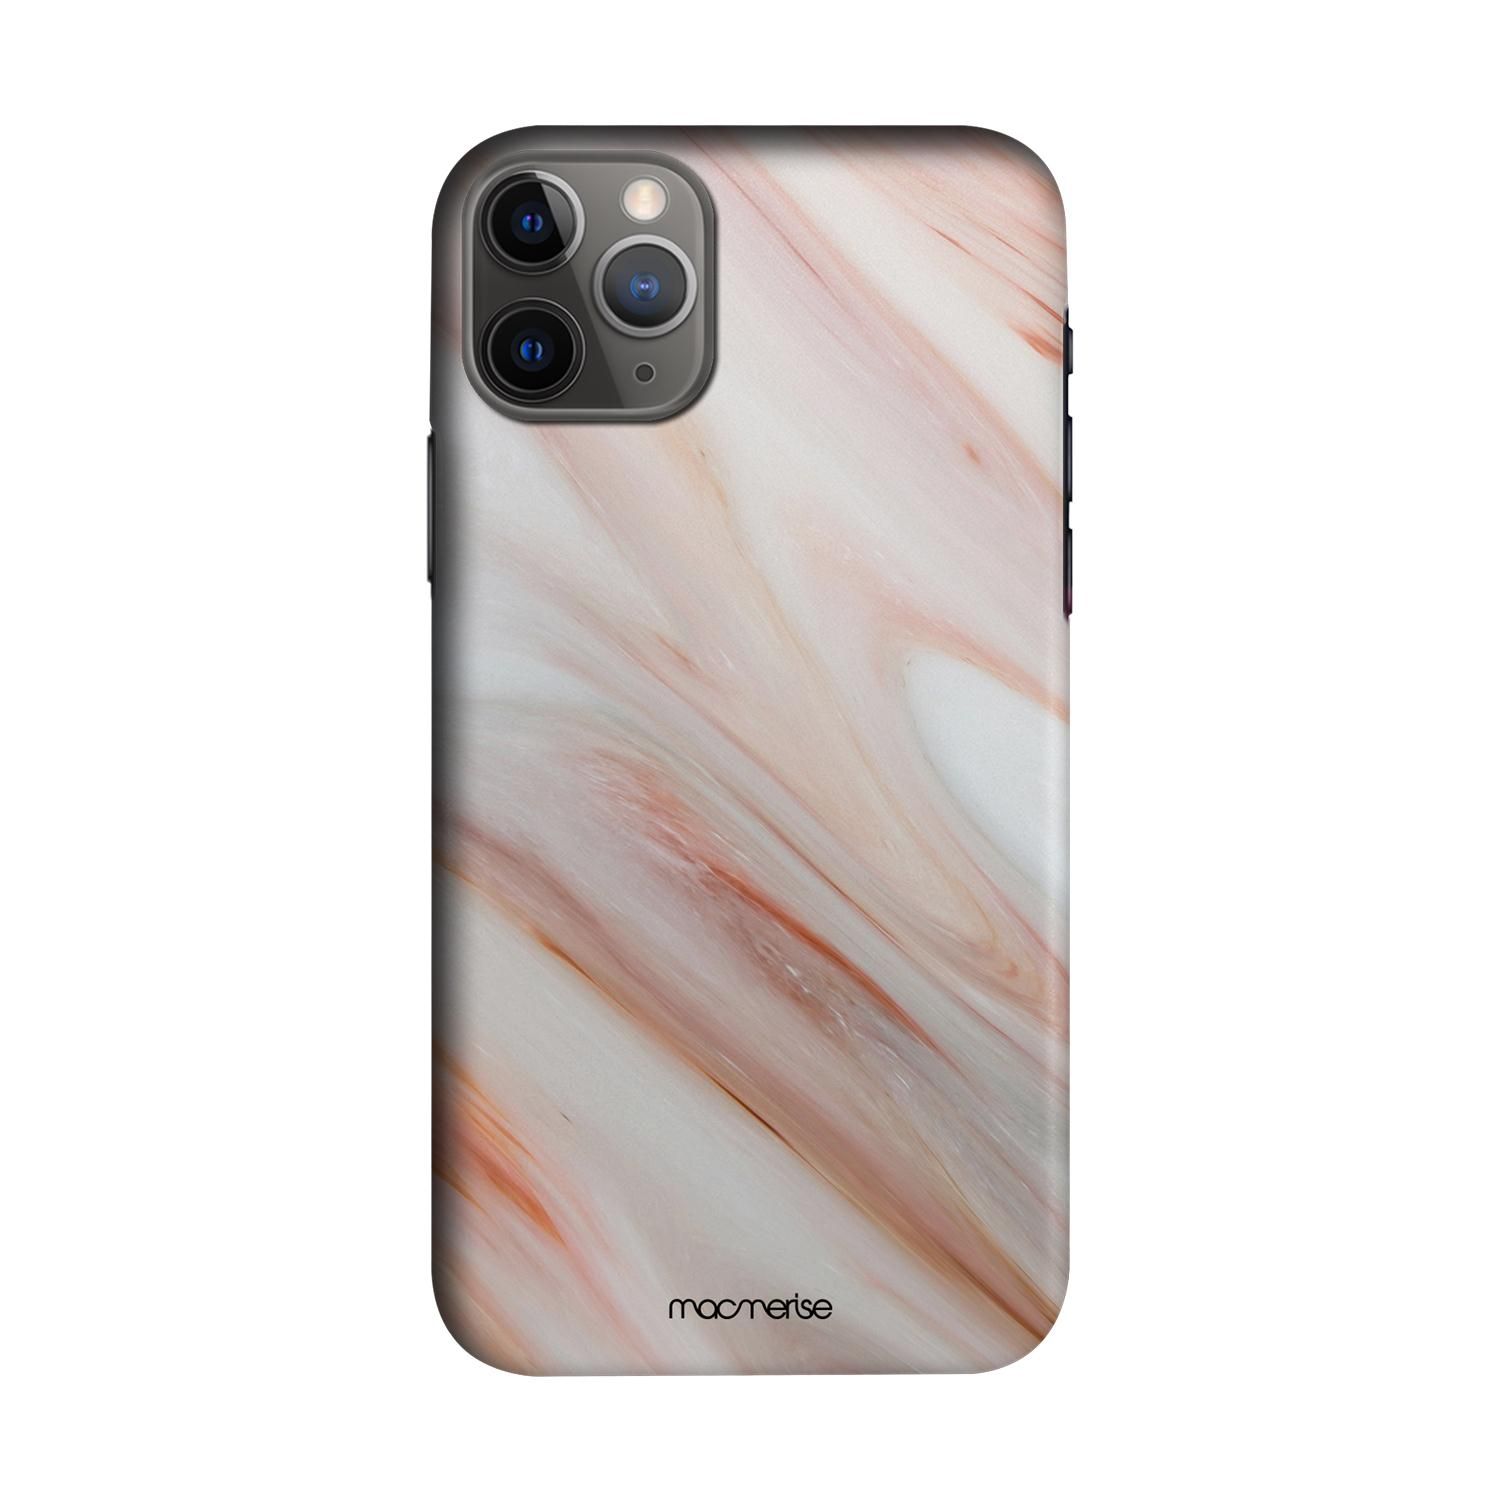 Buy Marble Rosa Levanto - Sleek Phone Case for iPhone 11 Pro Max Online